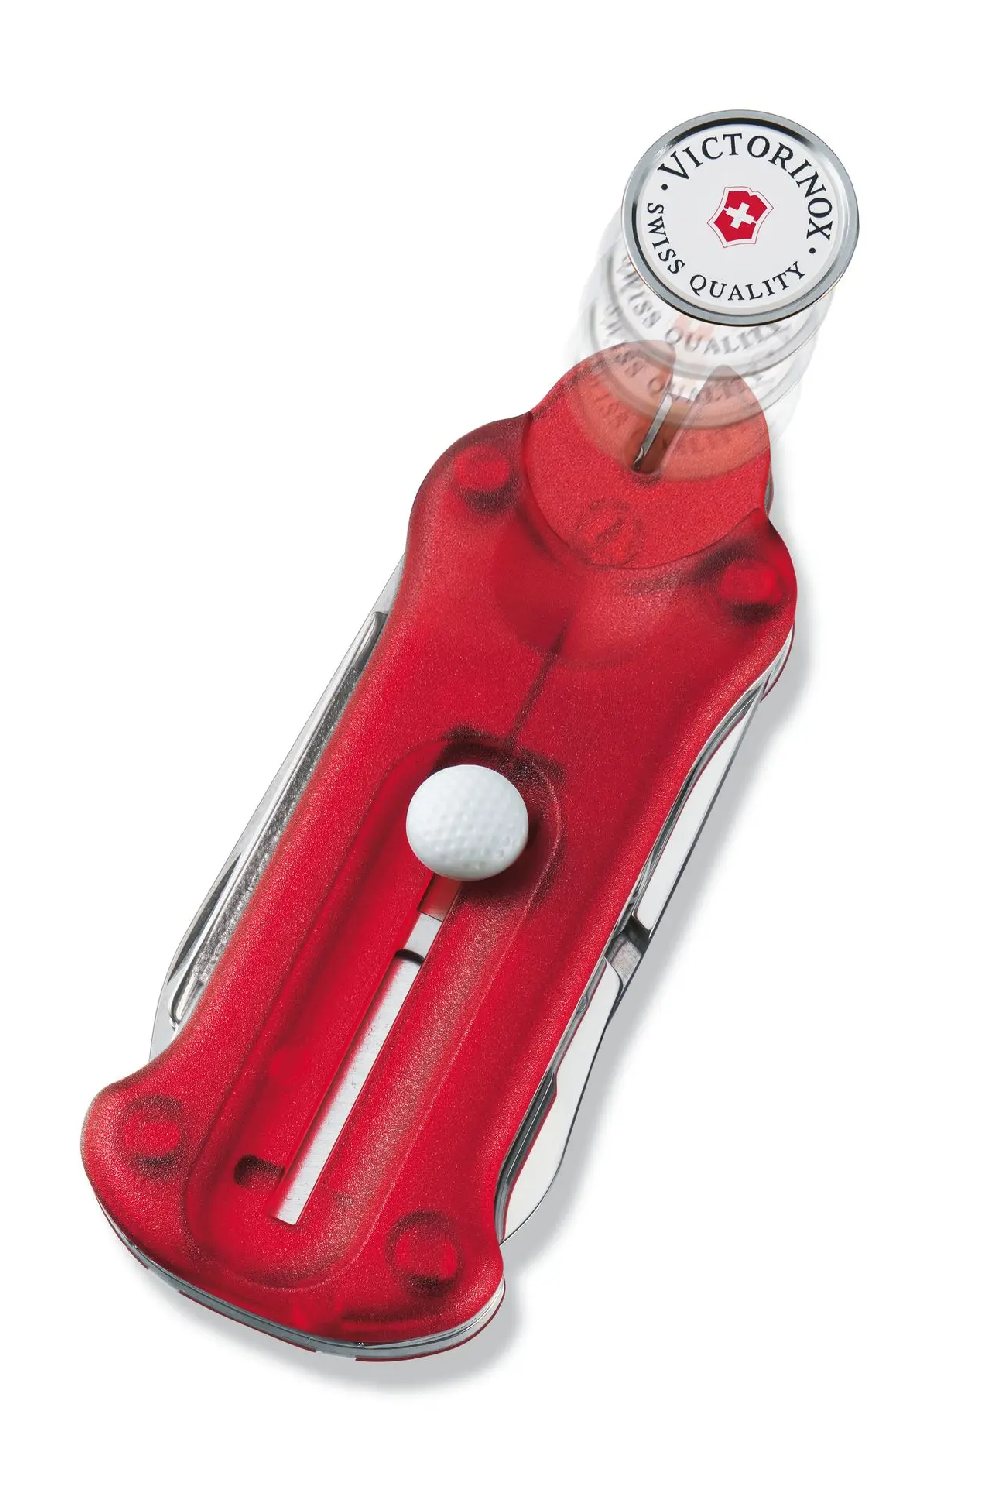 Victorinox Golf Tool Swiss Army Knife in Red Transparent